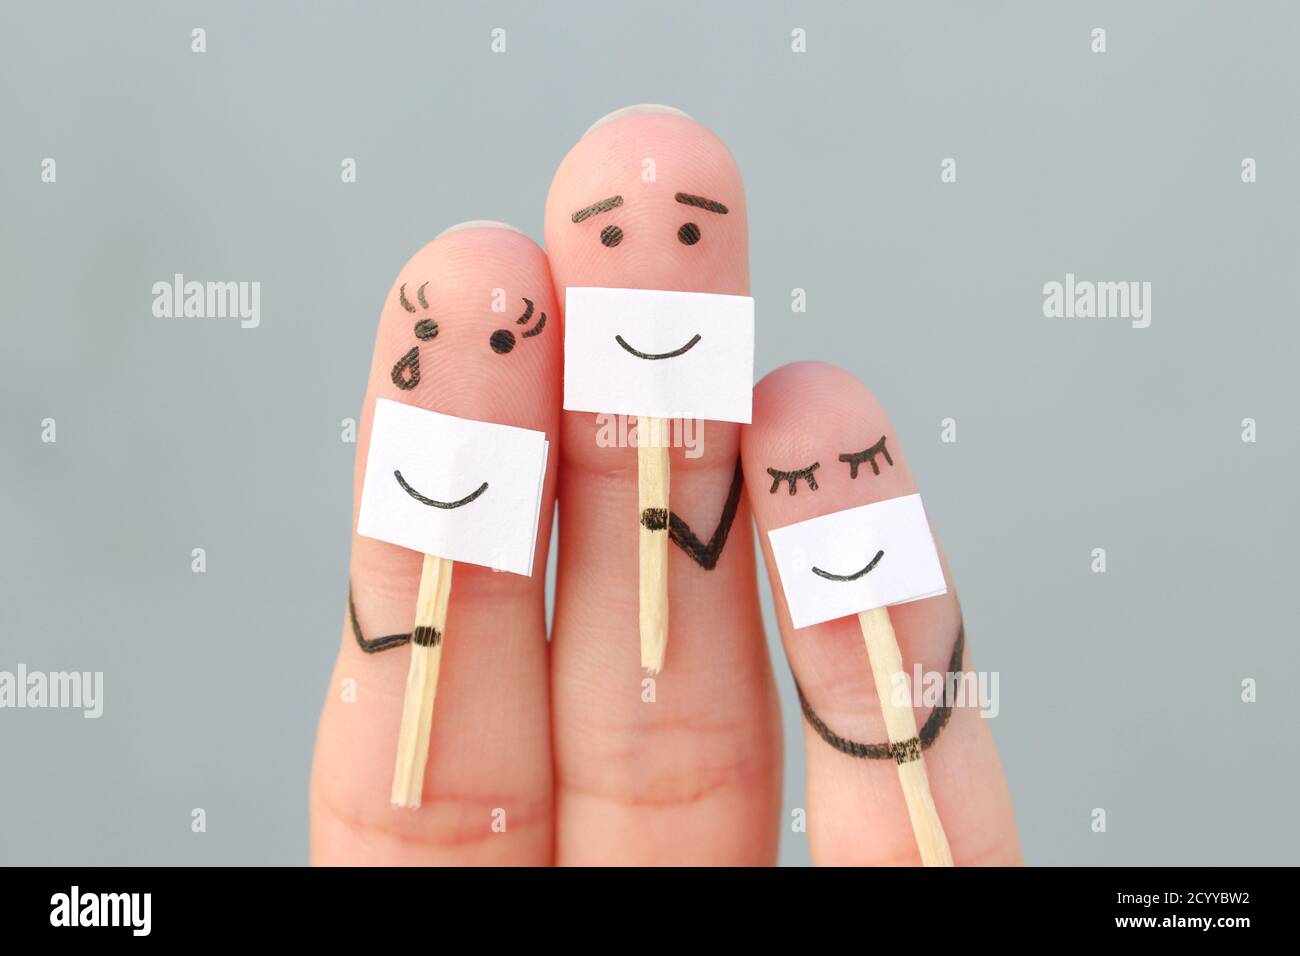 Fingers art of family. Concept of people hiding emotions. Stock Photo